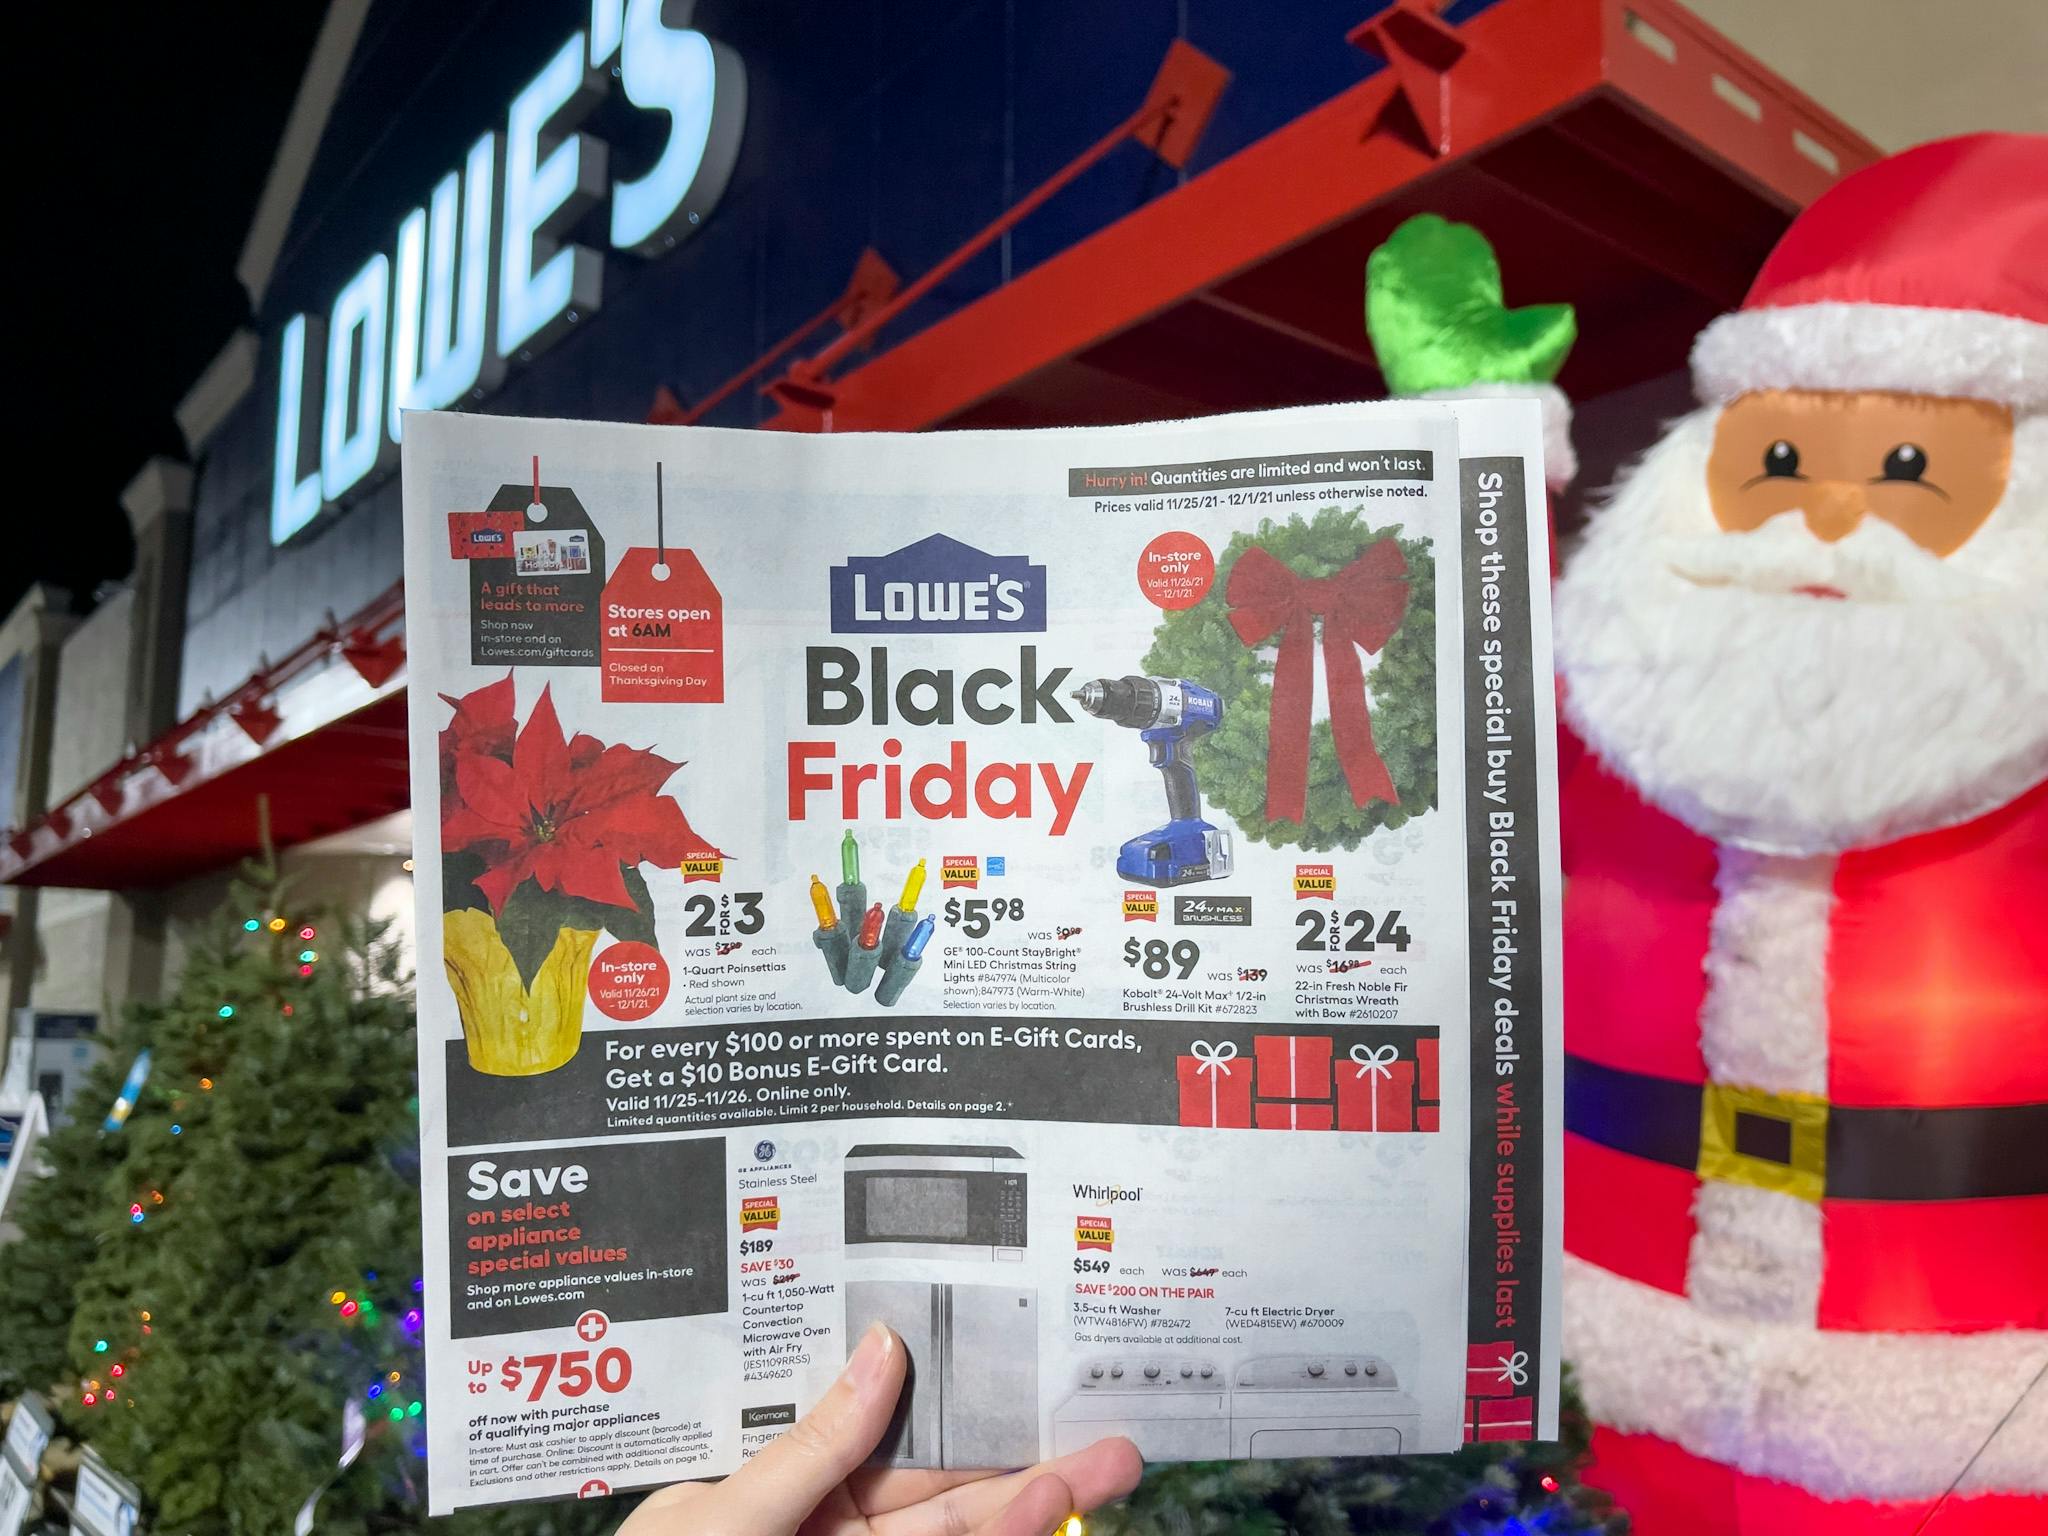 A person's hand holding up a Lowe's Black Friday ad in front of a Lowe's store and a Santa decoration.